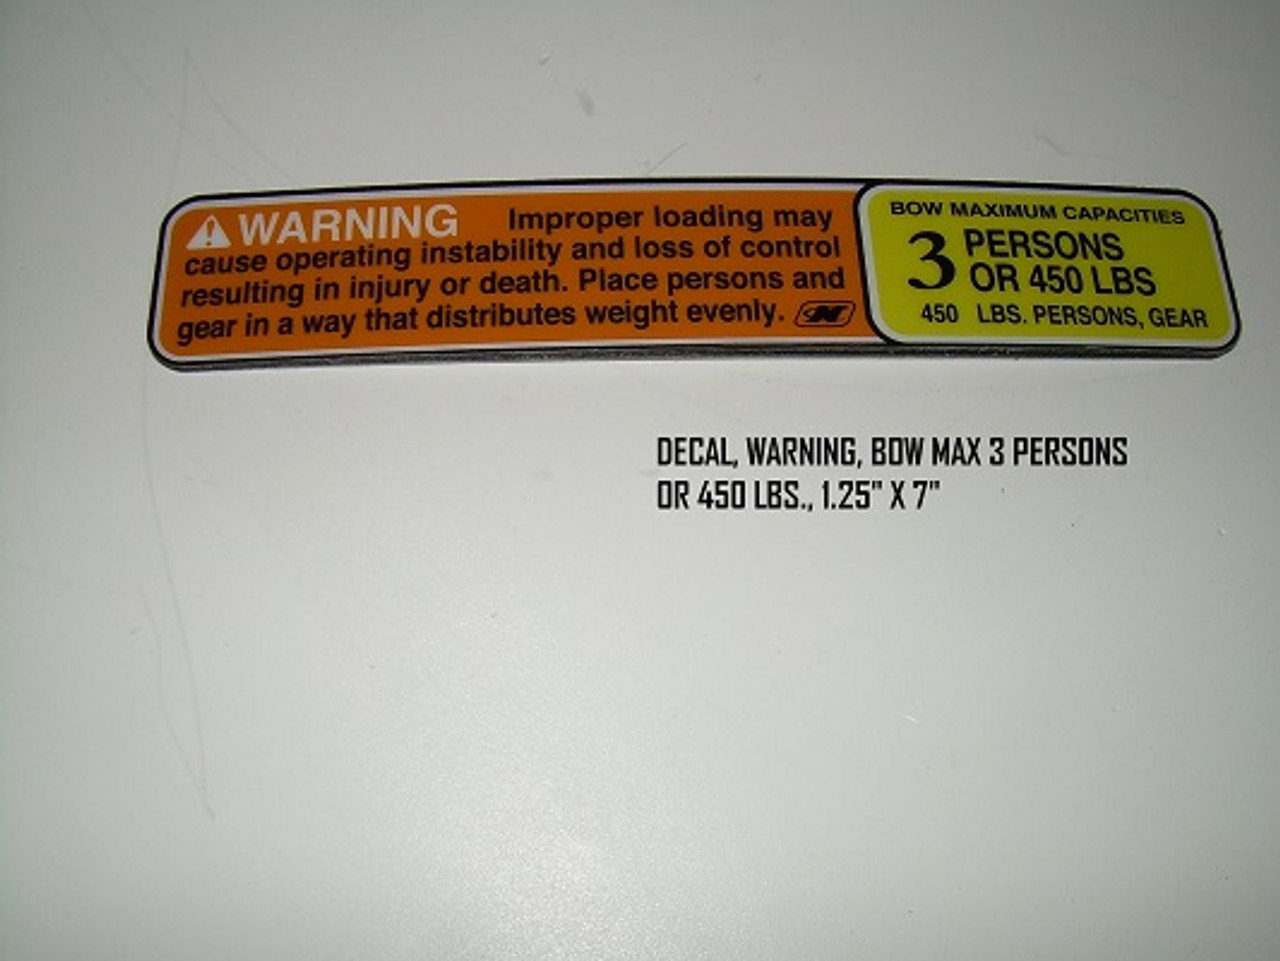 DECAL WARNING BOW MAX 3 PERSONS OR 450 LBS. 1.25" X 7"